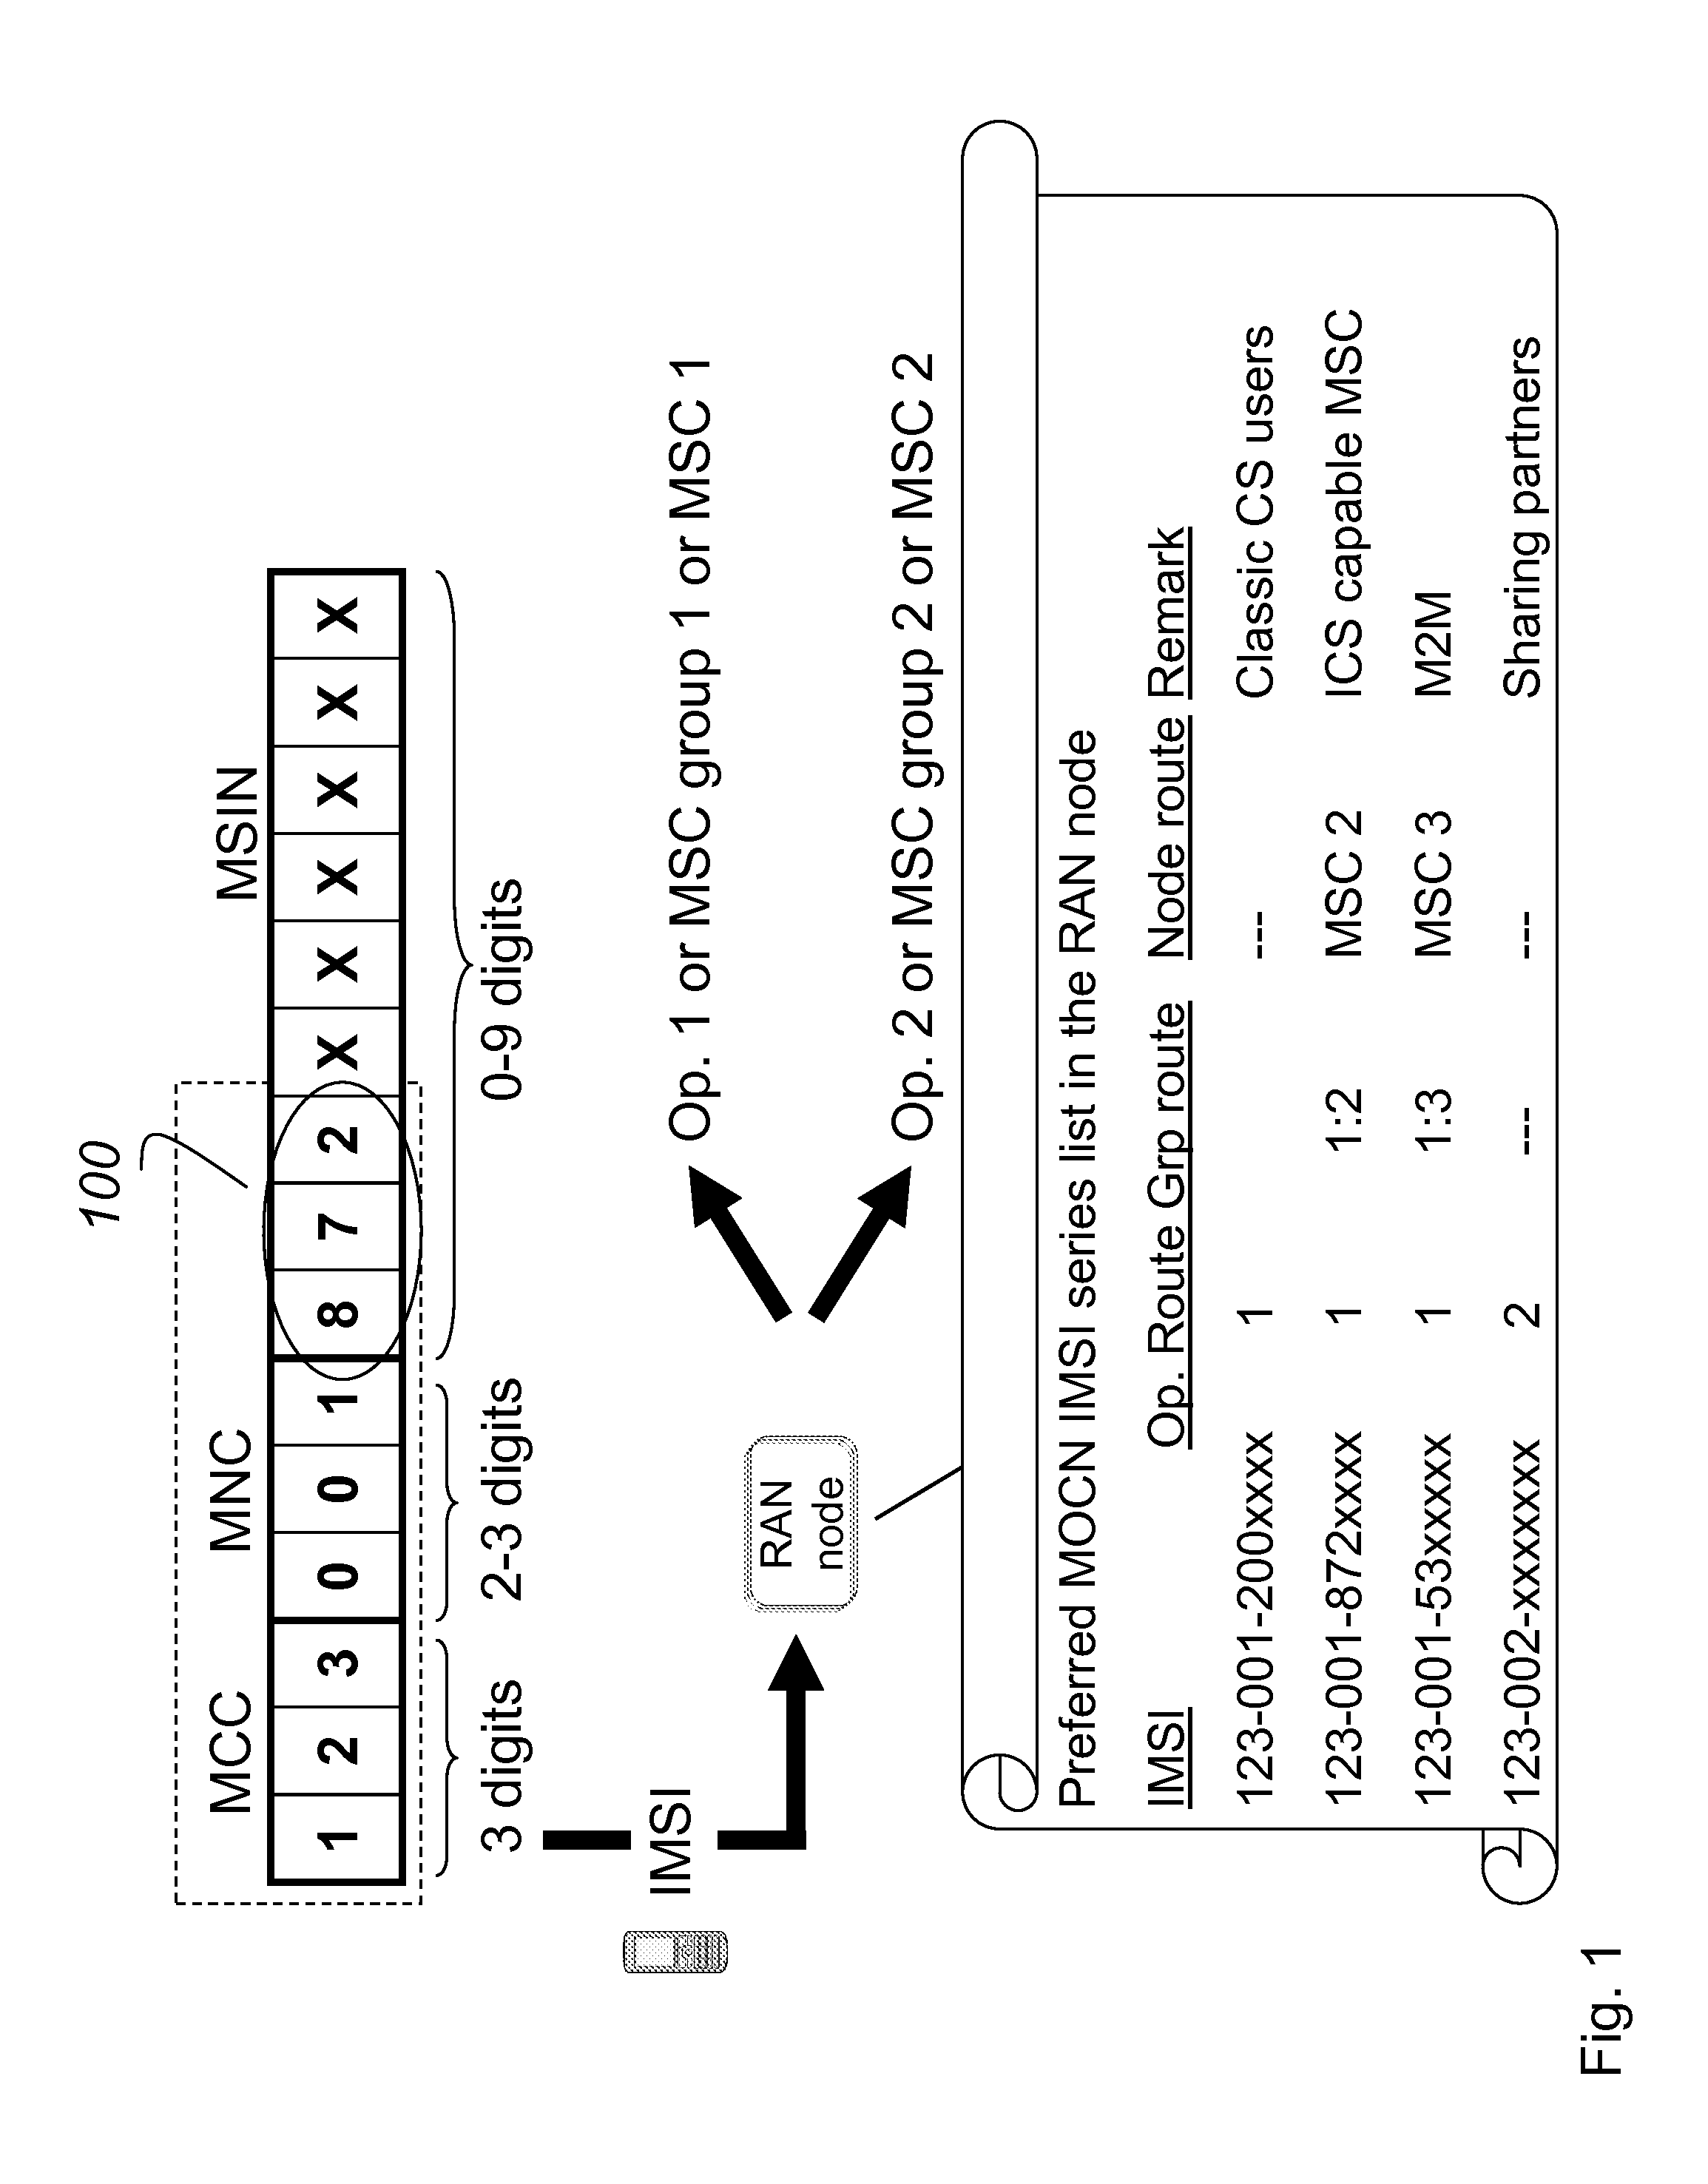 Methods and Network Nodes in a Mobile Communication Network